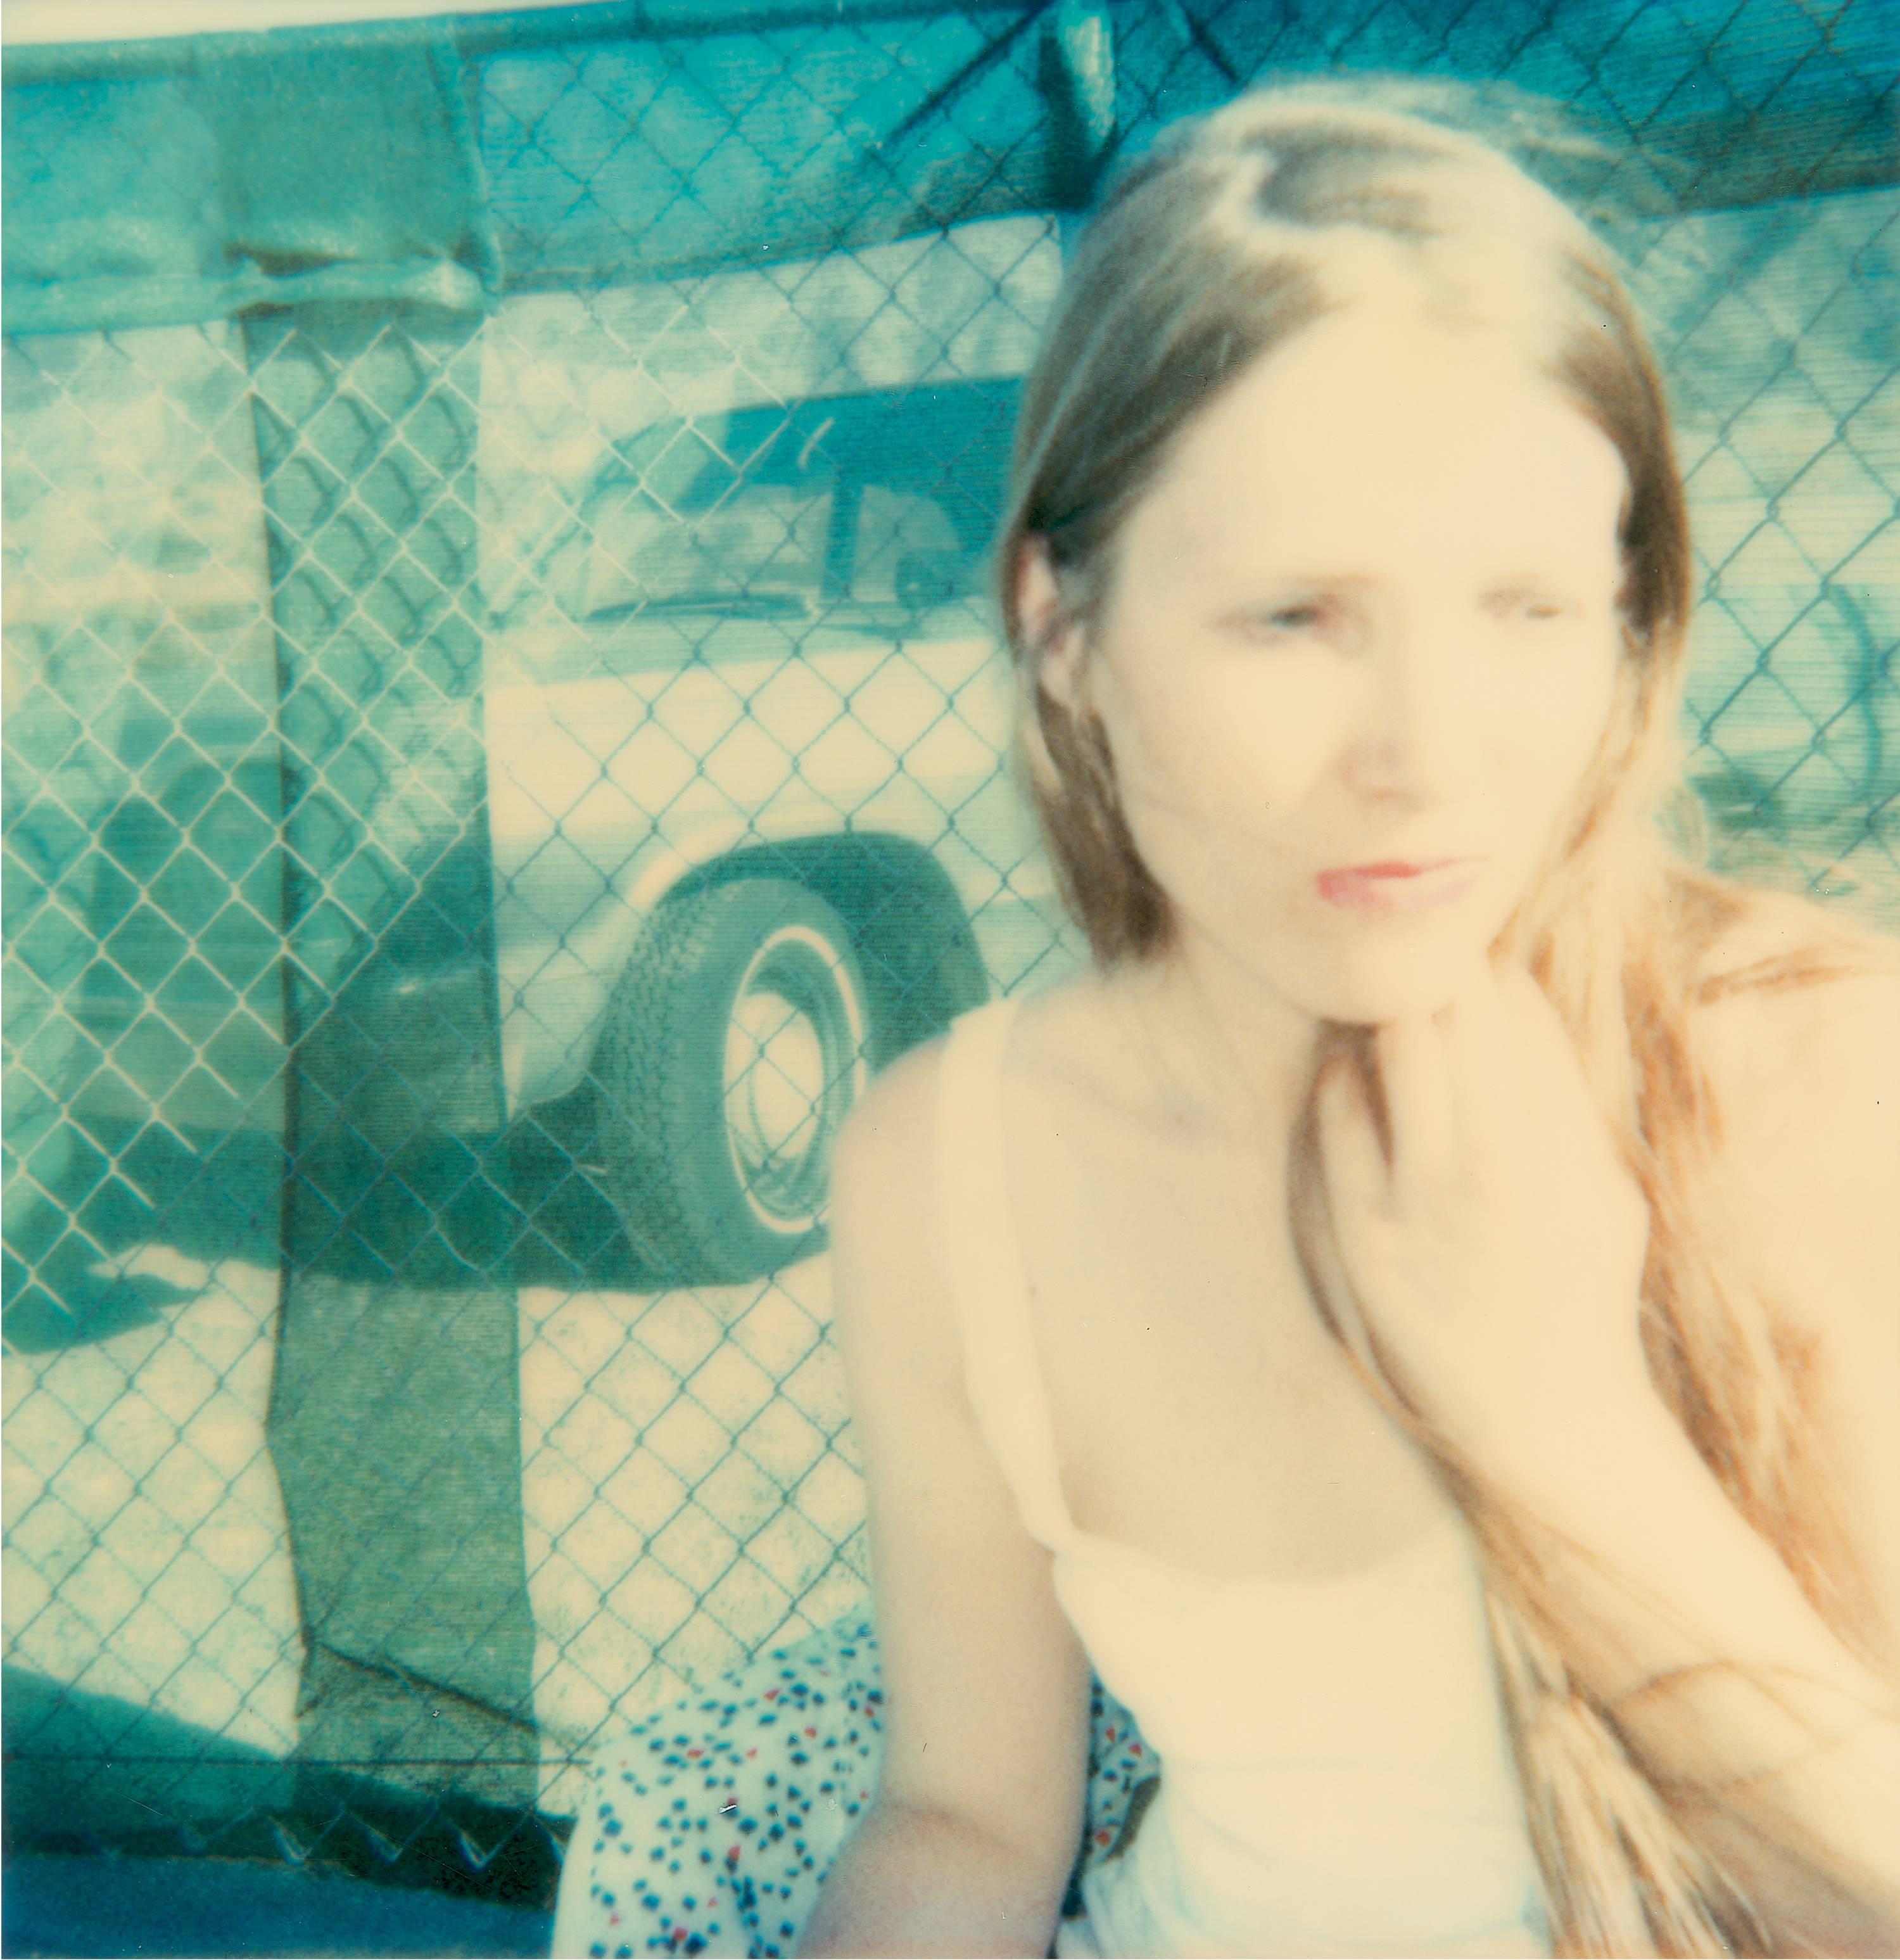 29 Day Dreams (29 Palms, CA) - 1999

38x36cm, 
Edition 1/30, 
Archival C-Print based her expired Polaroid photograph, 
Not mounted, 
Signature label and Certificate, artist inventory number: 614.42

THE GREATER THE EMPTINESS THE GRANDER THE ART –